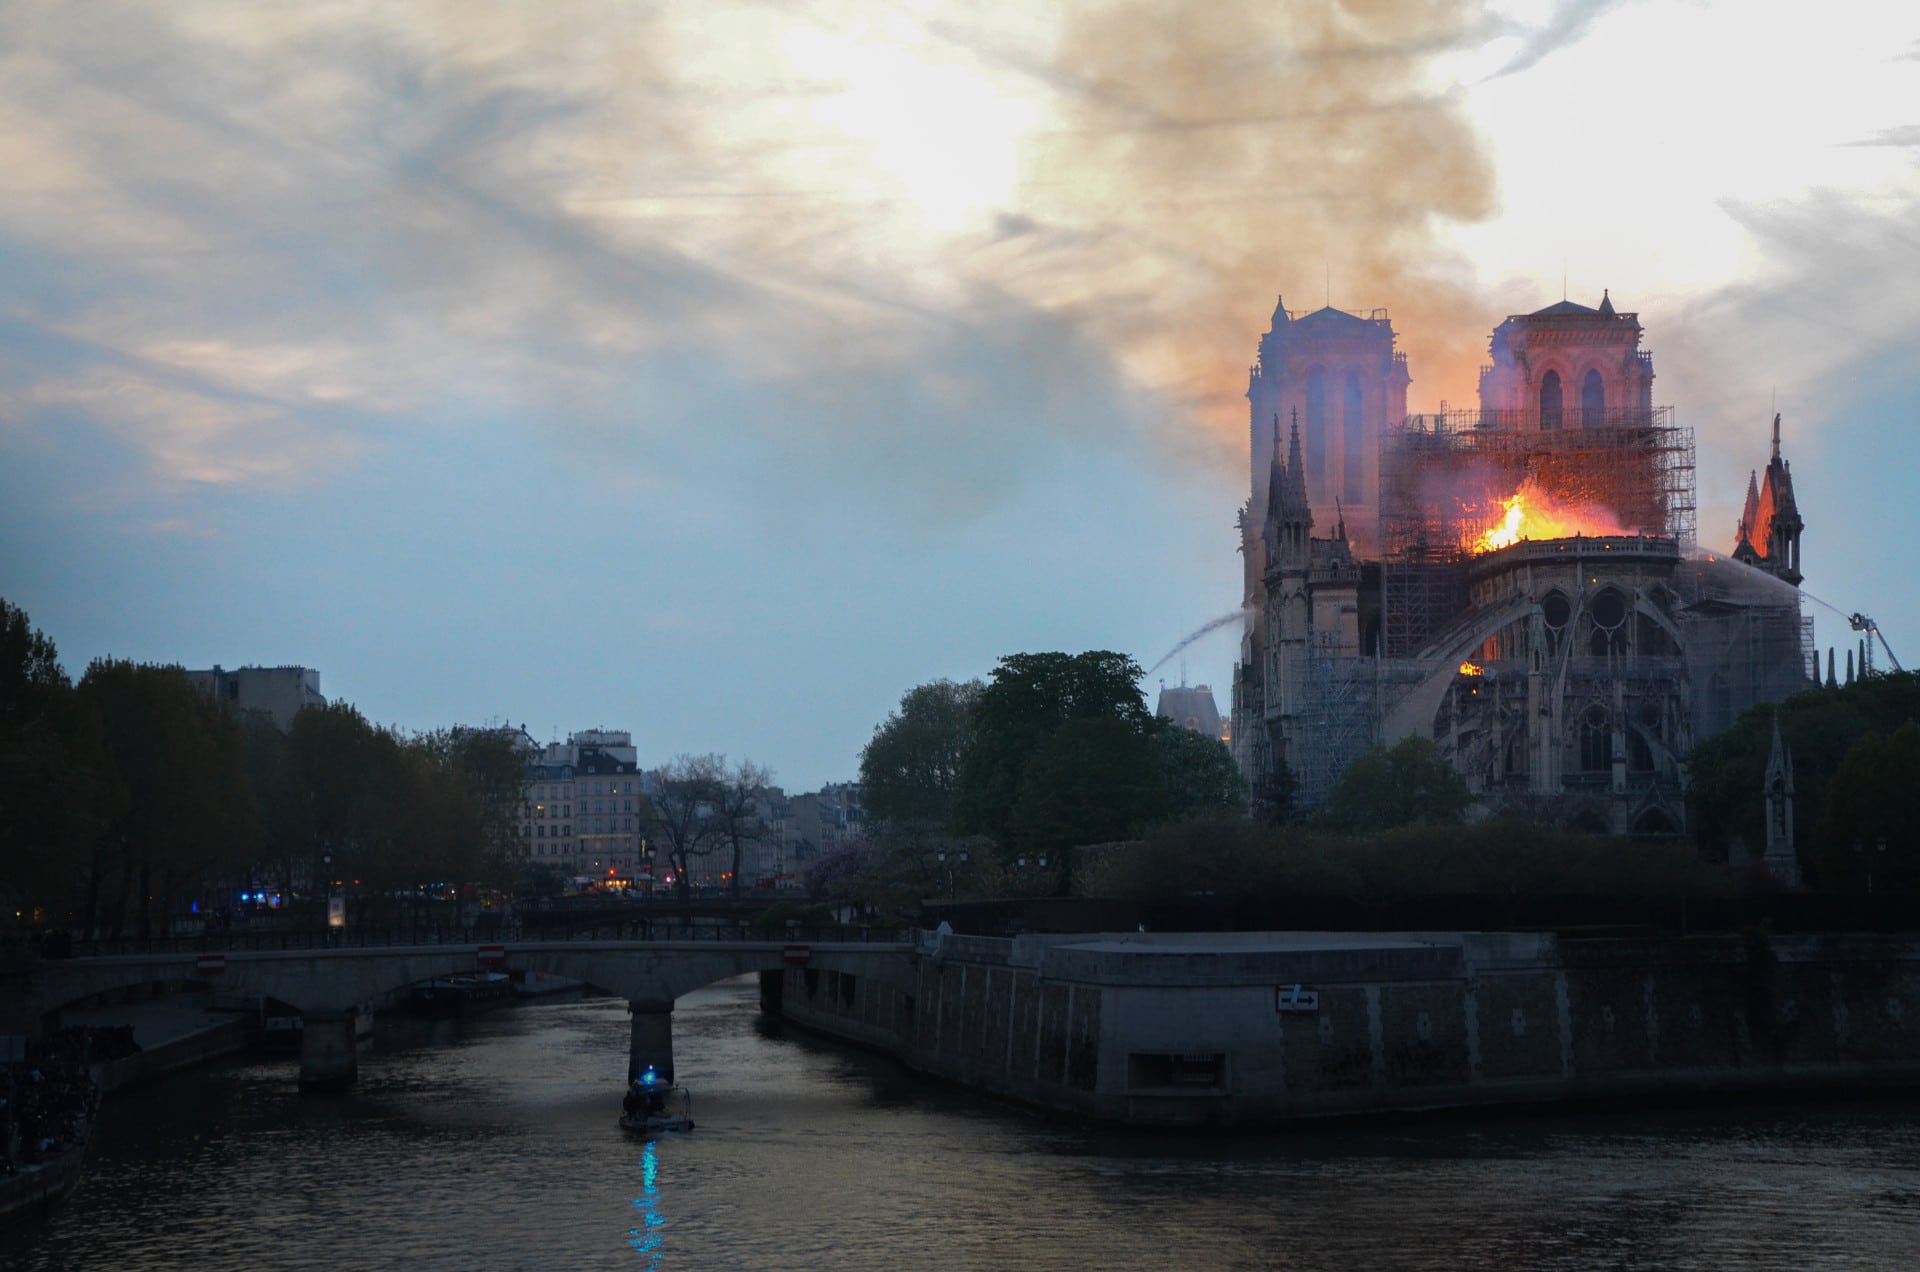 Notre-Dame Cathedral background image on Friends of Notre-Dame de Paris' official fundraising website. This picture was taken during the fire. You can see the fire fighters trying to contain and kill the fire that started in the roof of Notre-Dame Cathedral.